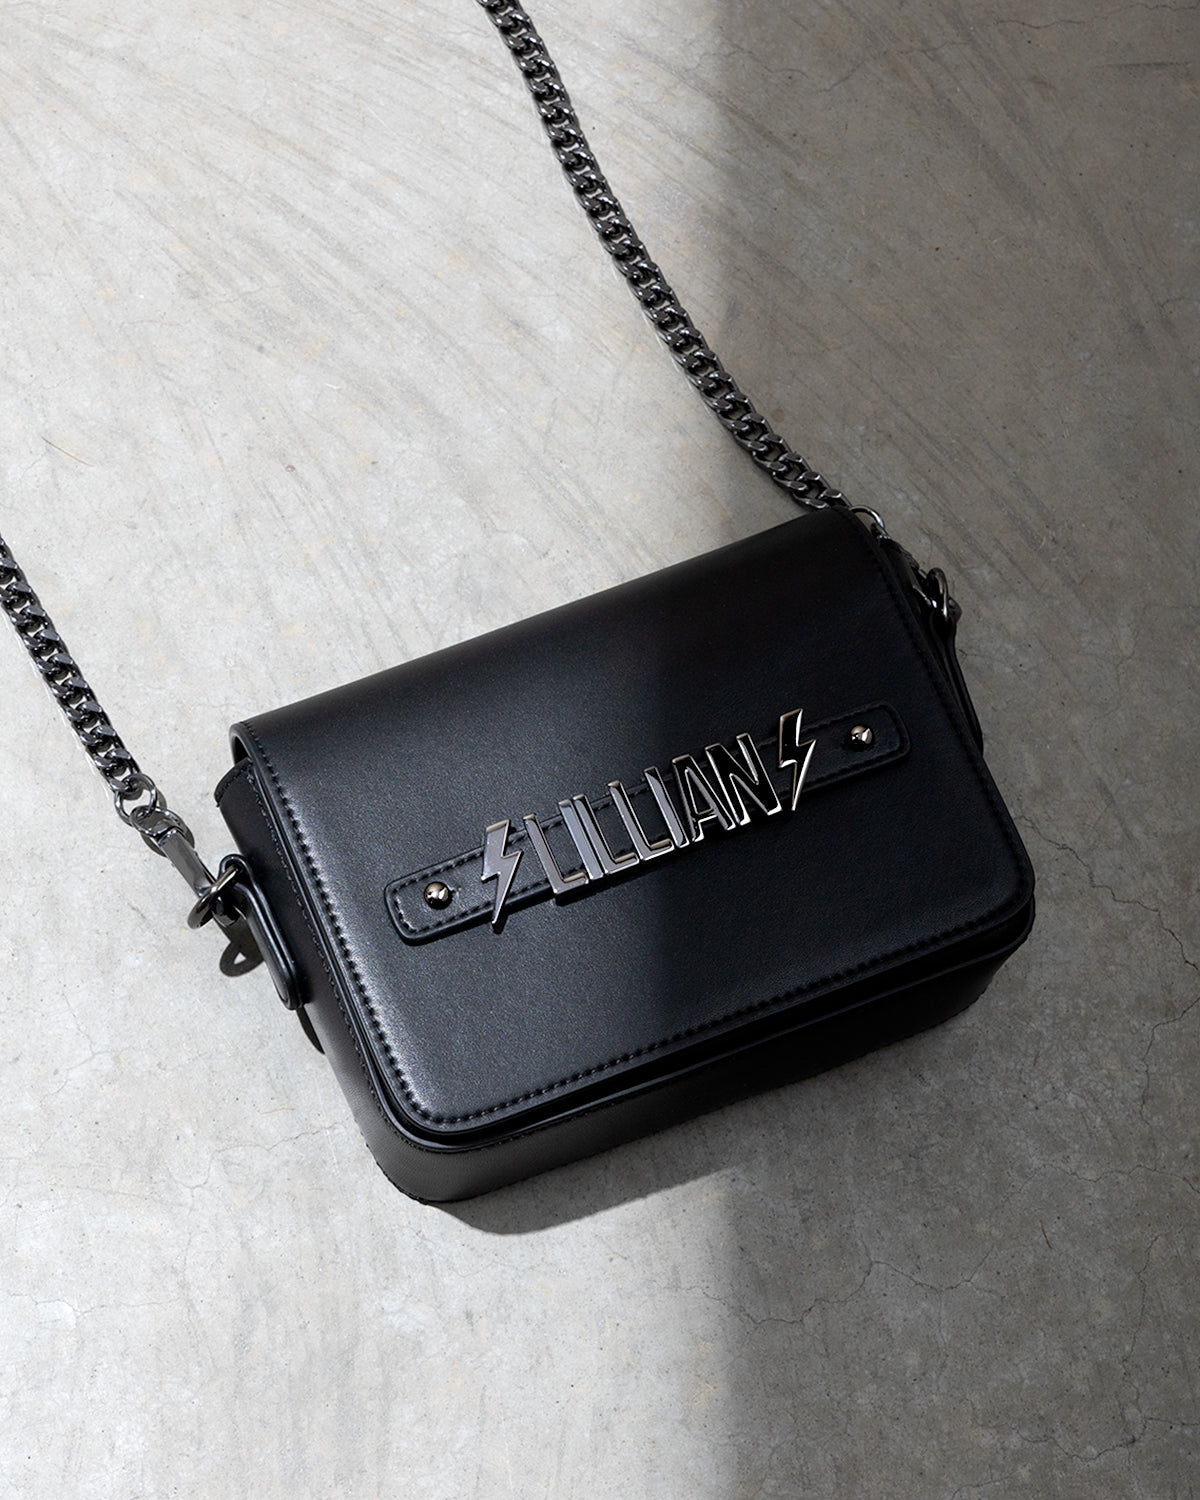 Crossbody Bag in Black with Personalised Hardware